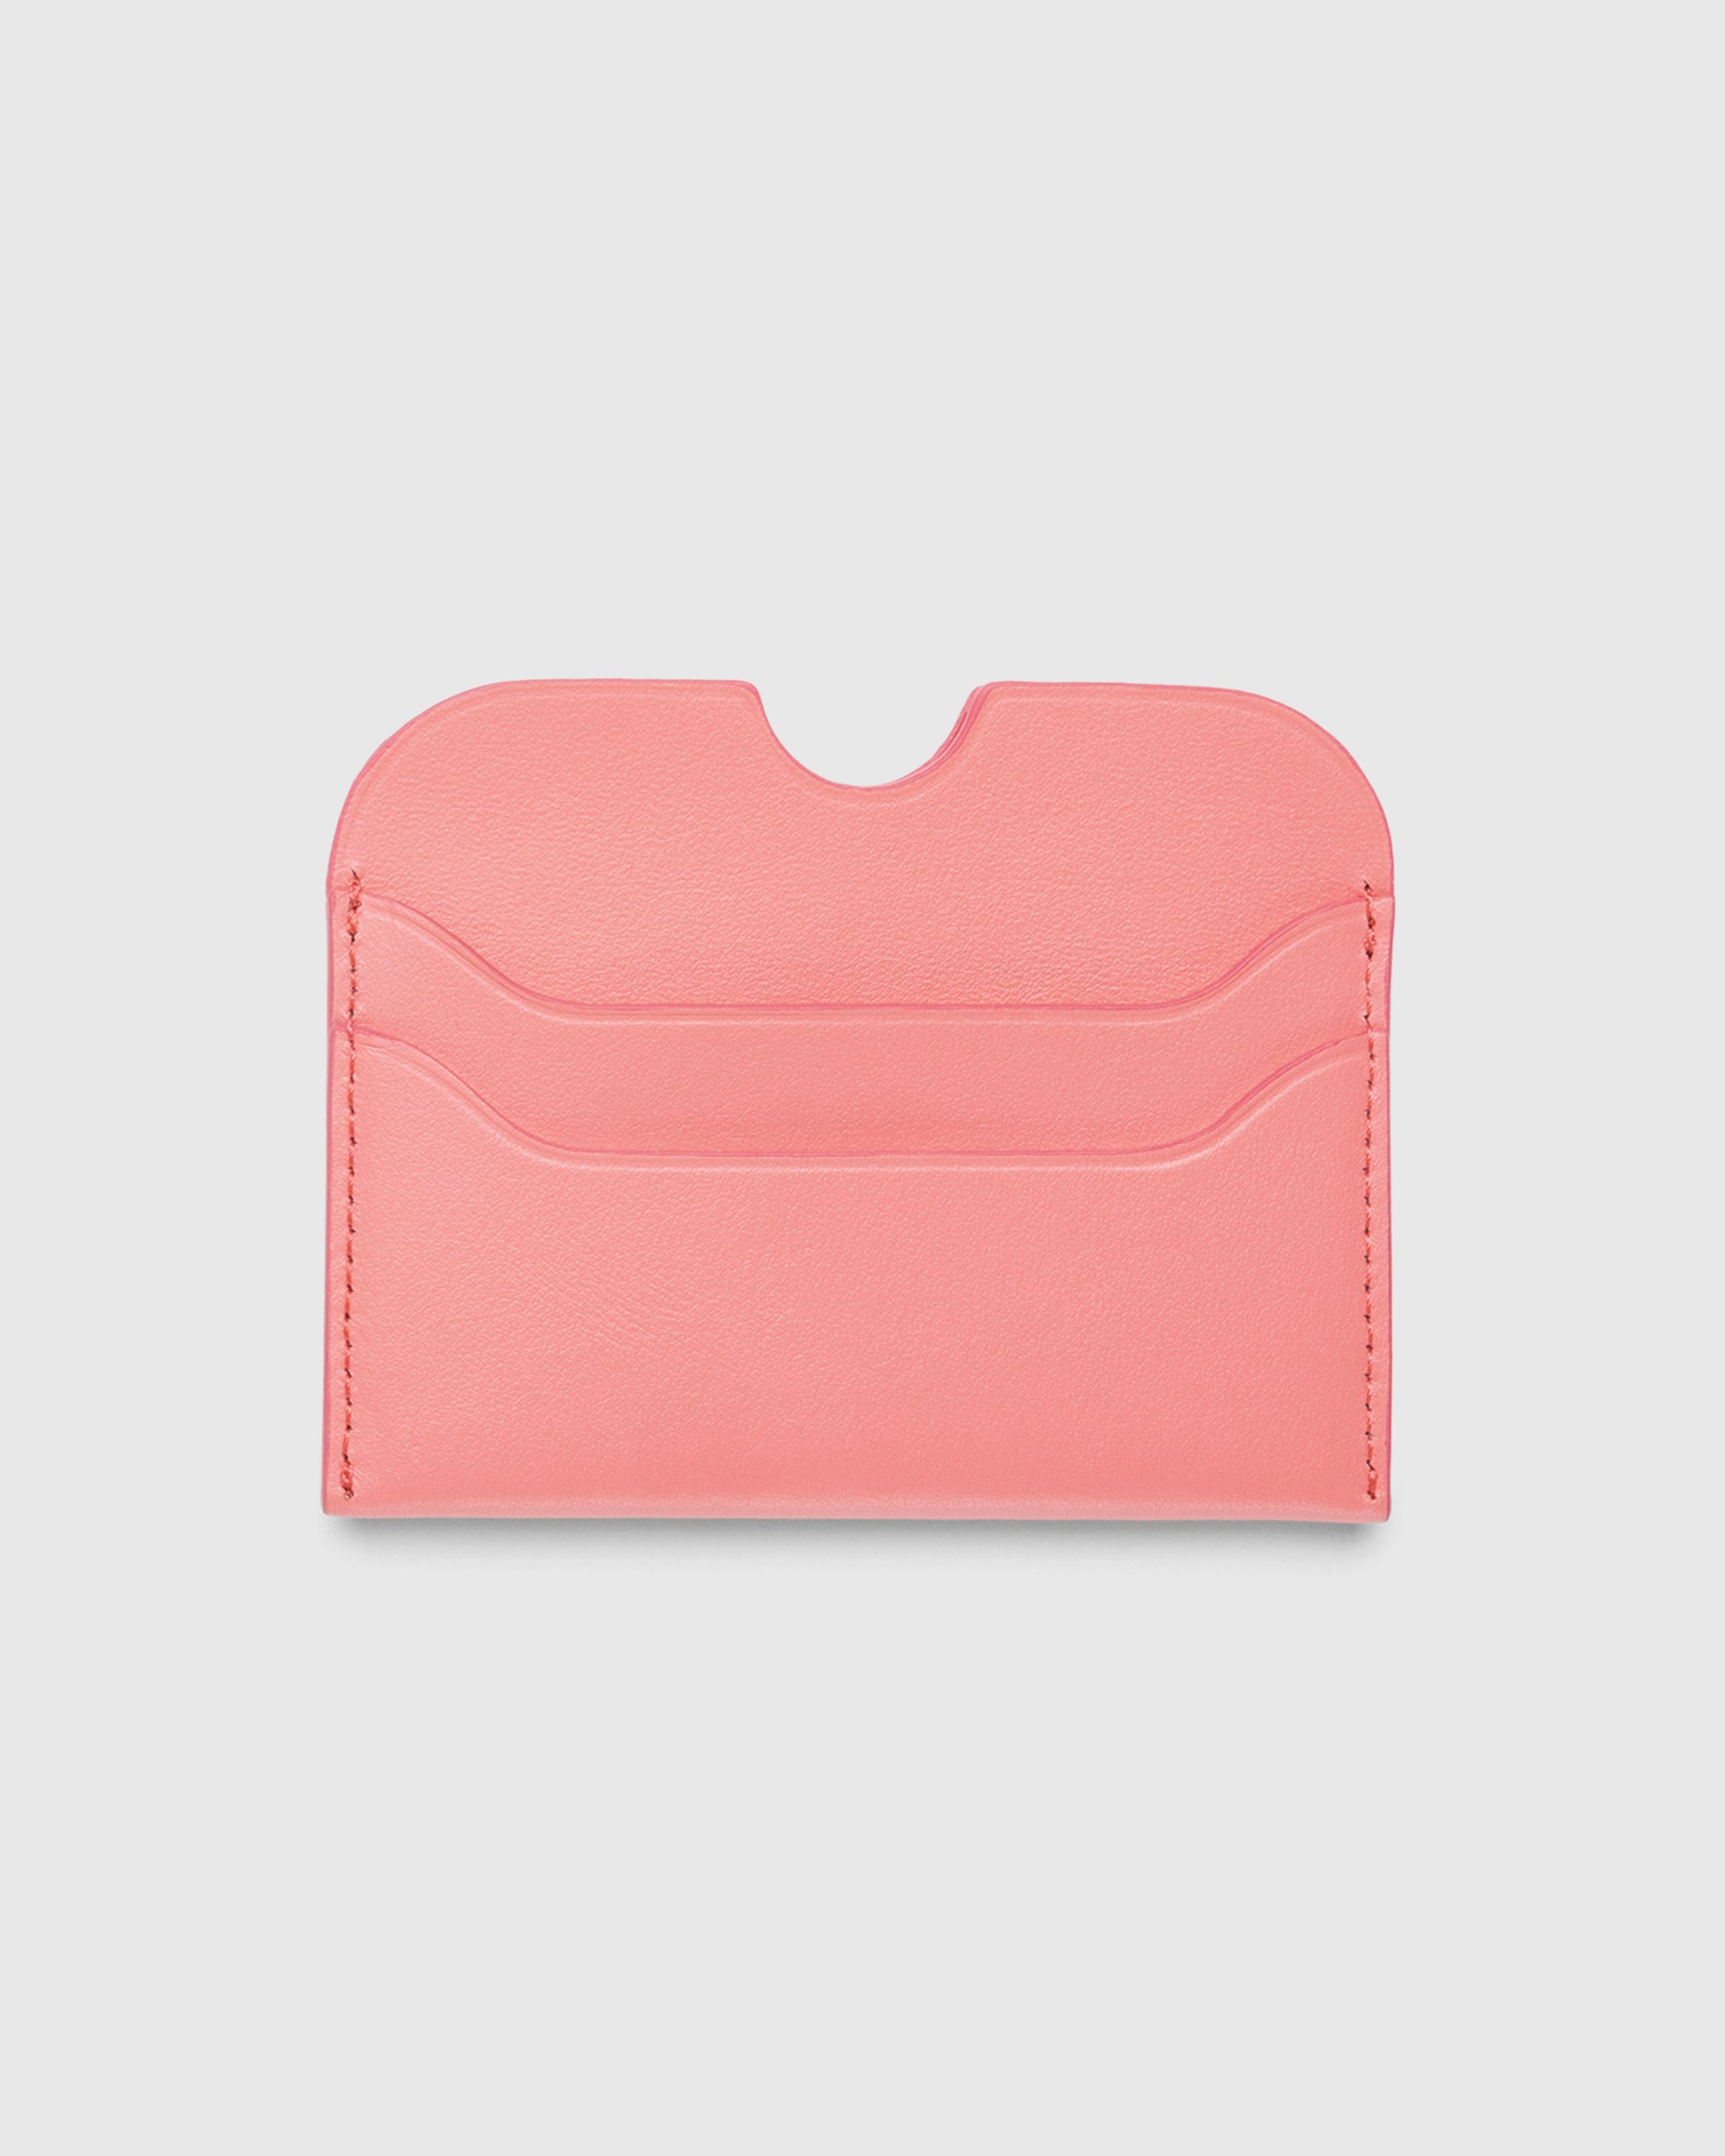 Acne Studios - Leather Card Holder Electric Pink - Accessories - Pink - Image 2